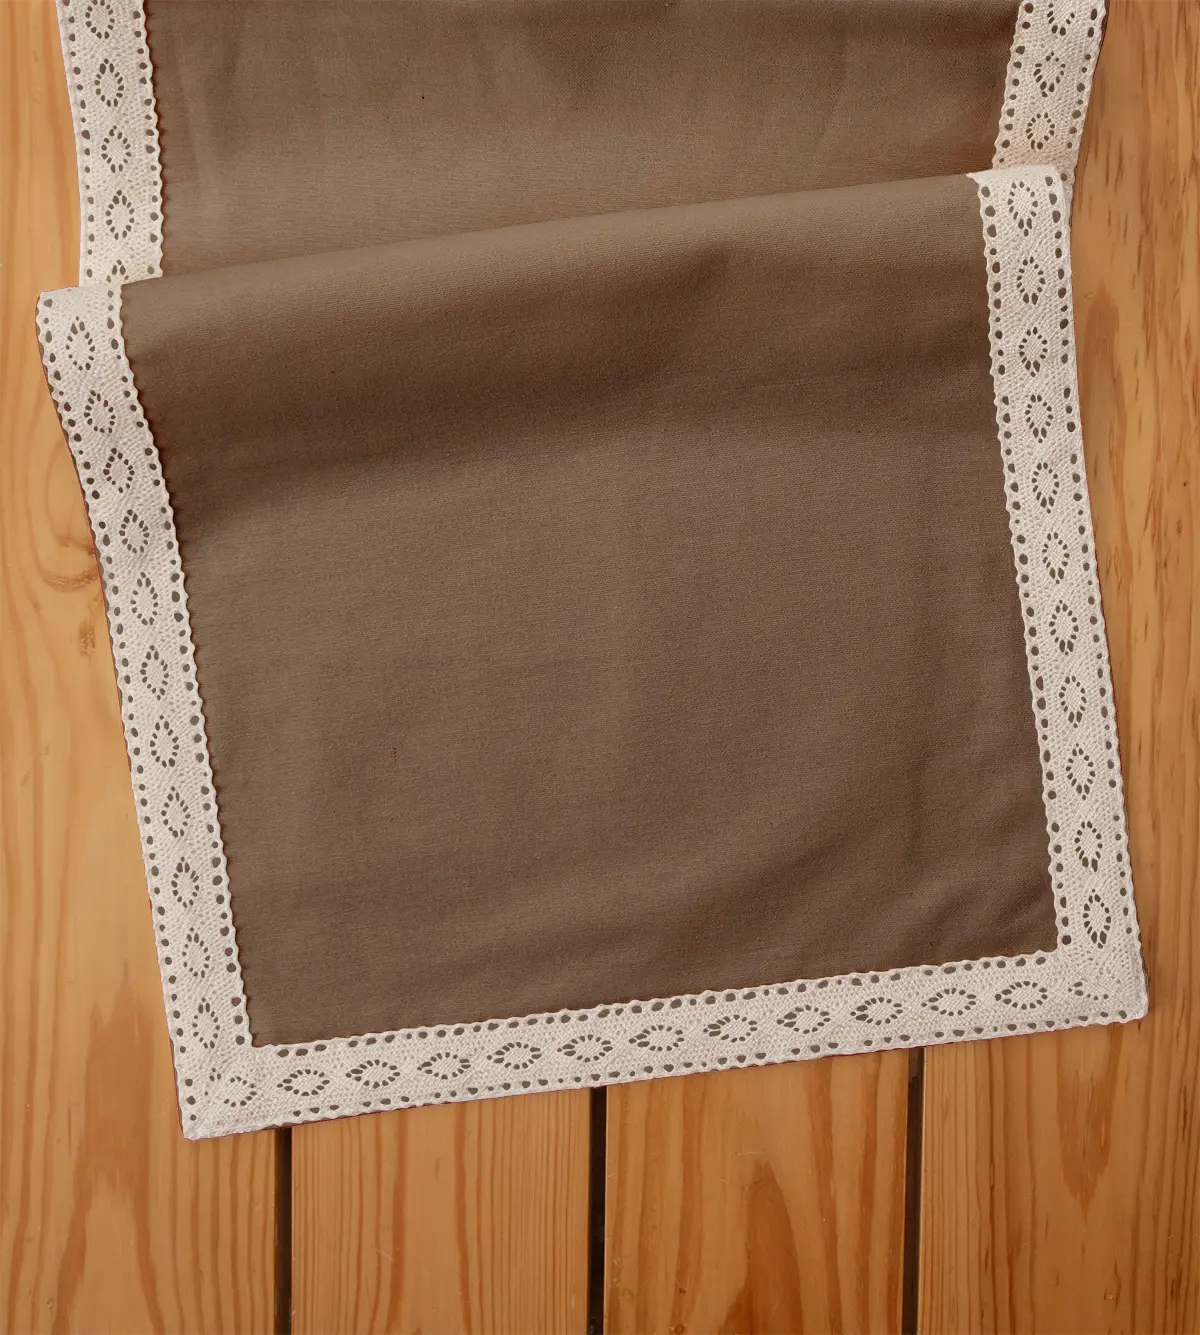 Solid chocolate brown 100% cotton plain table runner for 4 seater or 6 seater dining  with lace boarder